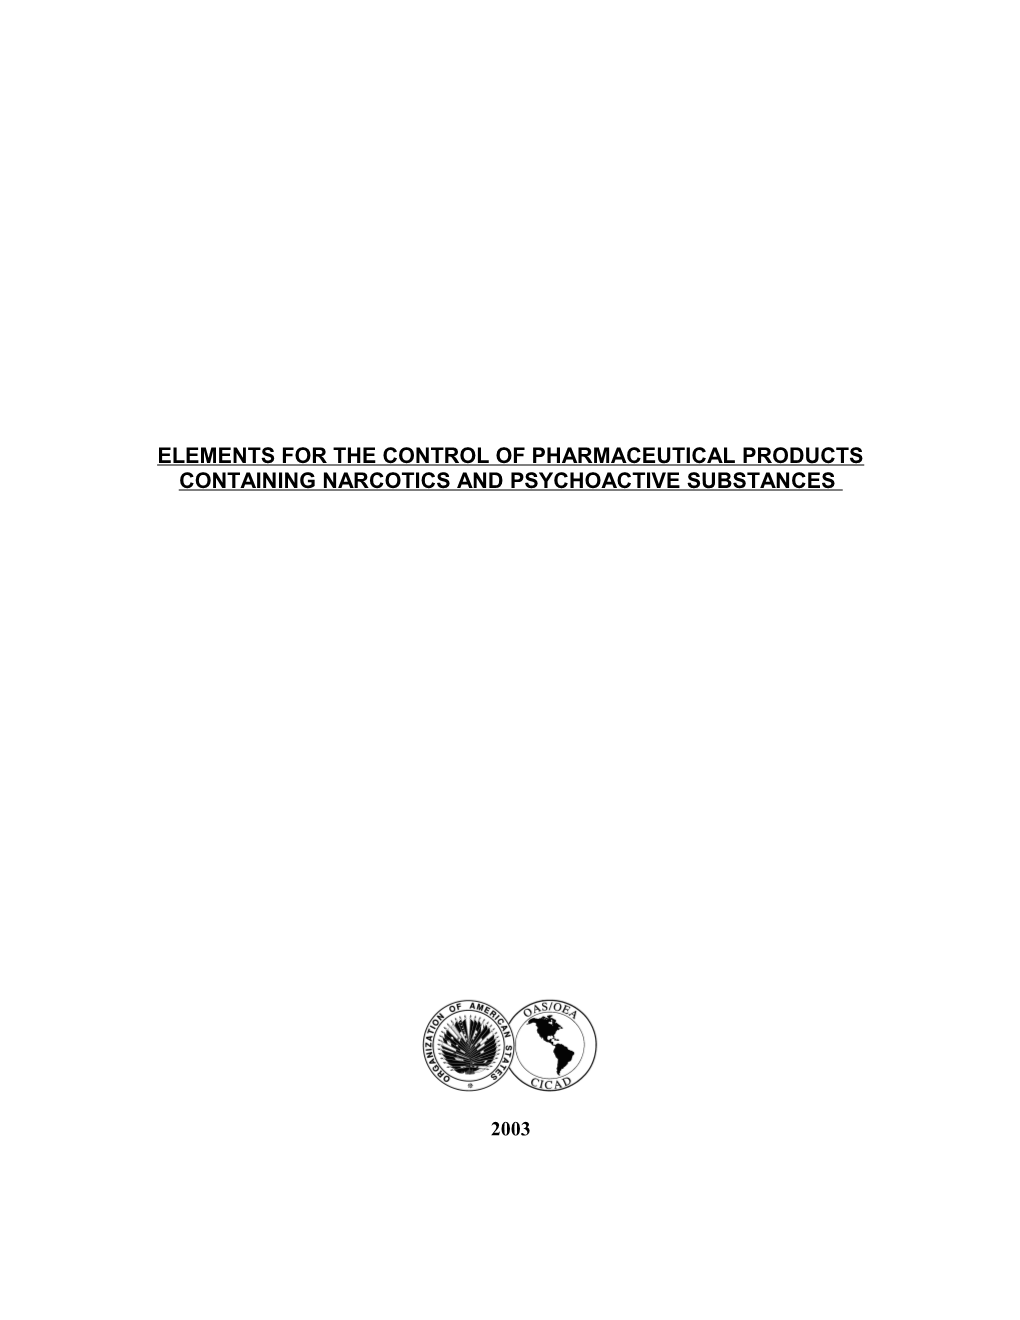 Elements for the Control of Pharmaceutical Products Containing Narcotics and Psychoactive